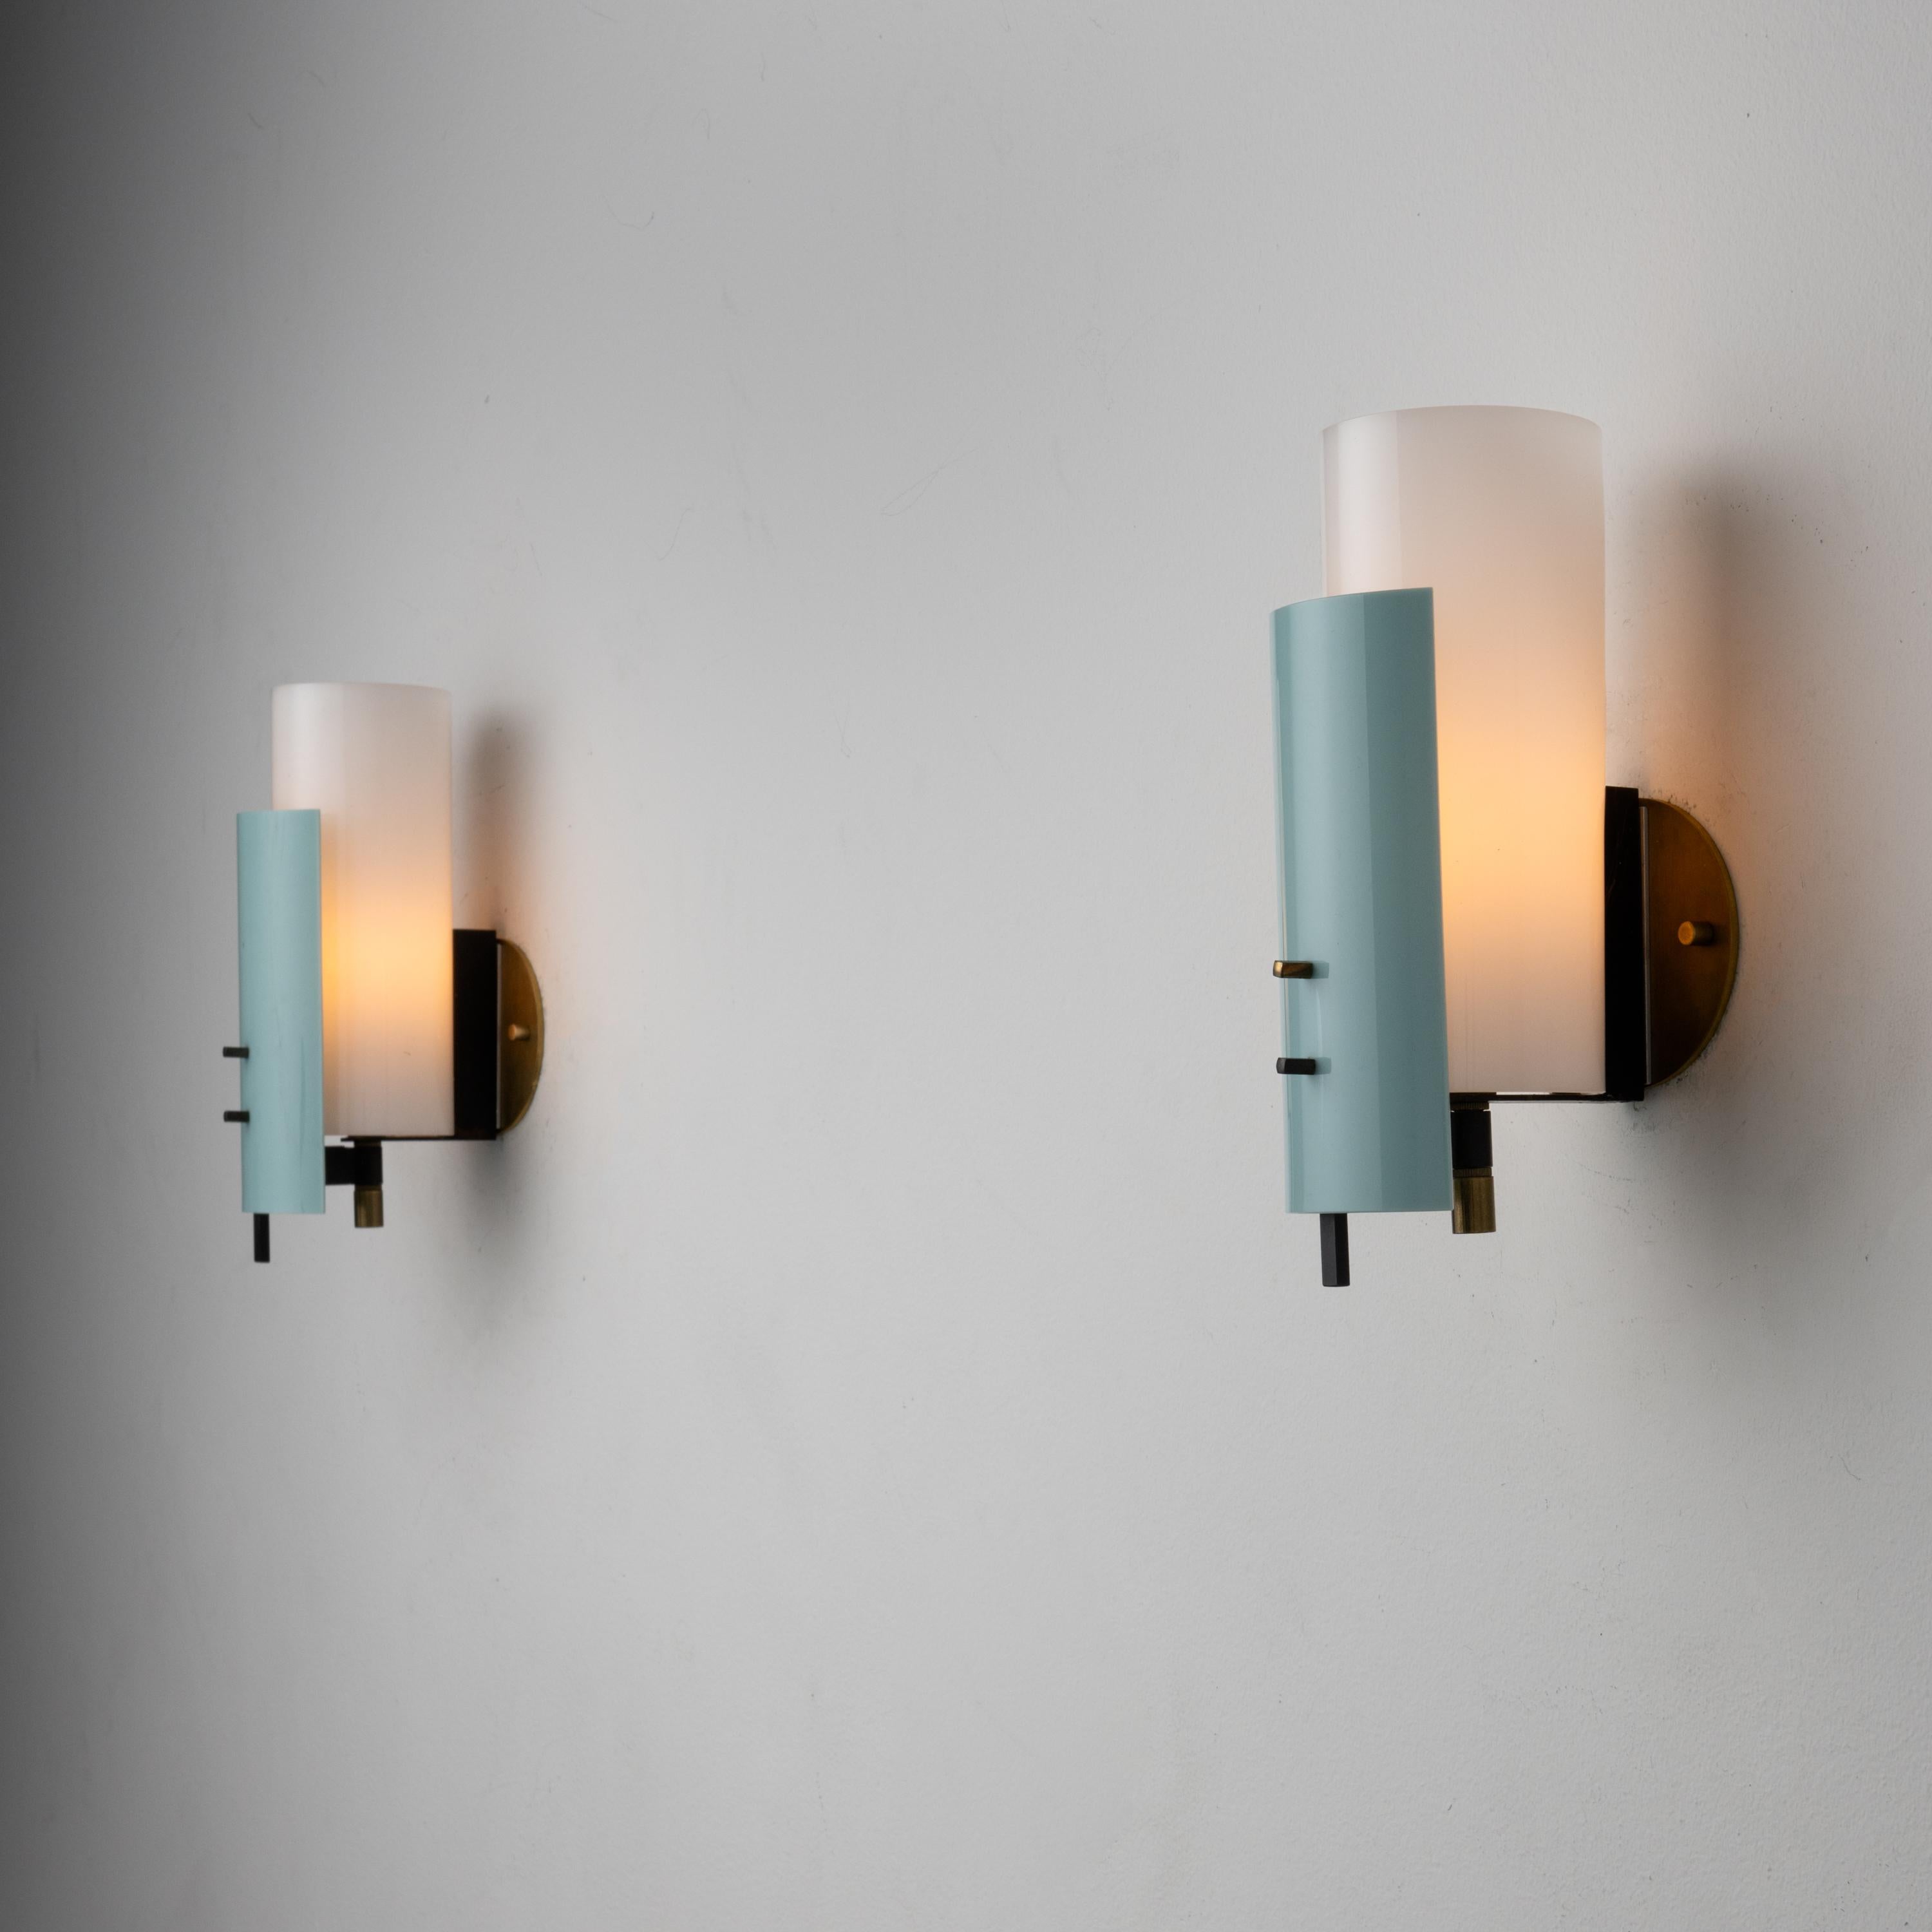 Pair of sconces by Stilnovo. Manufactured in Italy, circa the 1960s. Acrylic and brass. Custom brass backplates. Each sconce takes one E27 25W maximum bulb. Bulbs are provided as a one-time courtesy. Quantity two yellow and two green/grey front